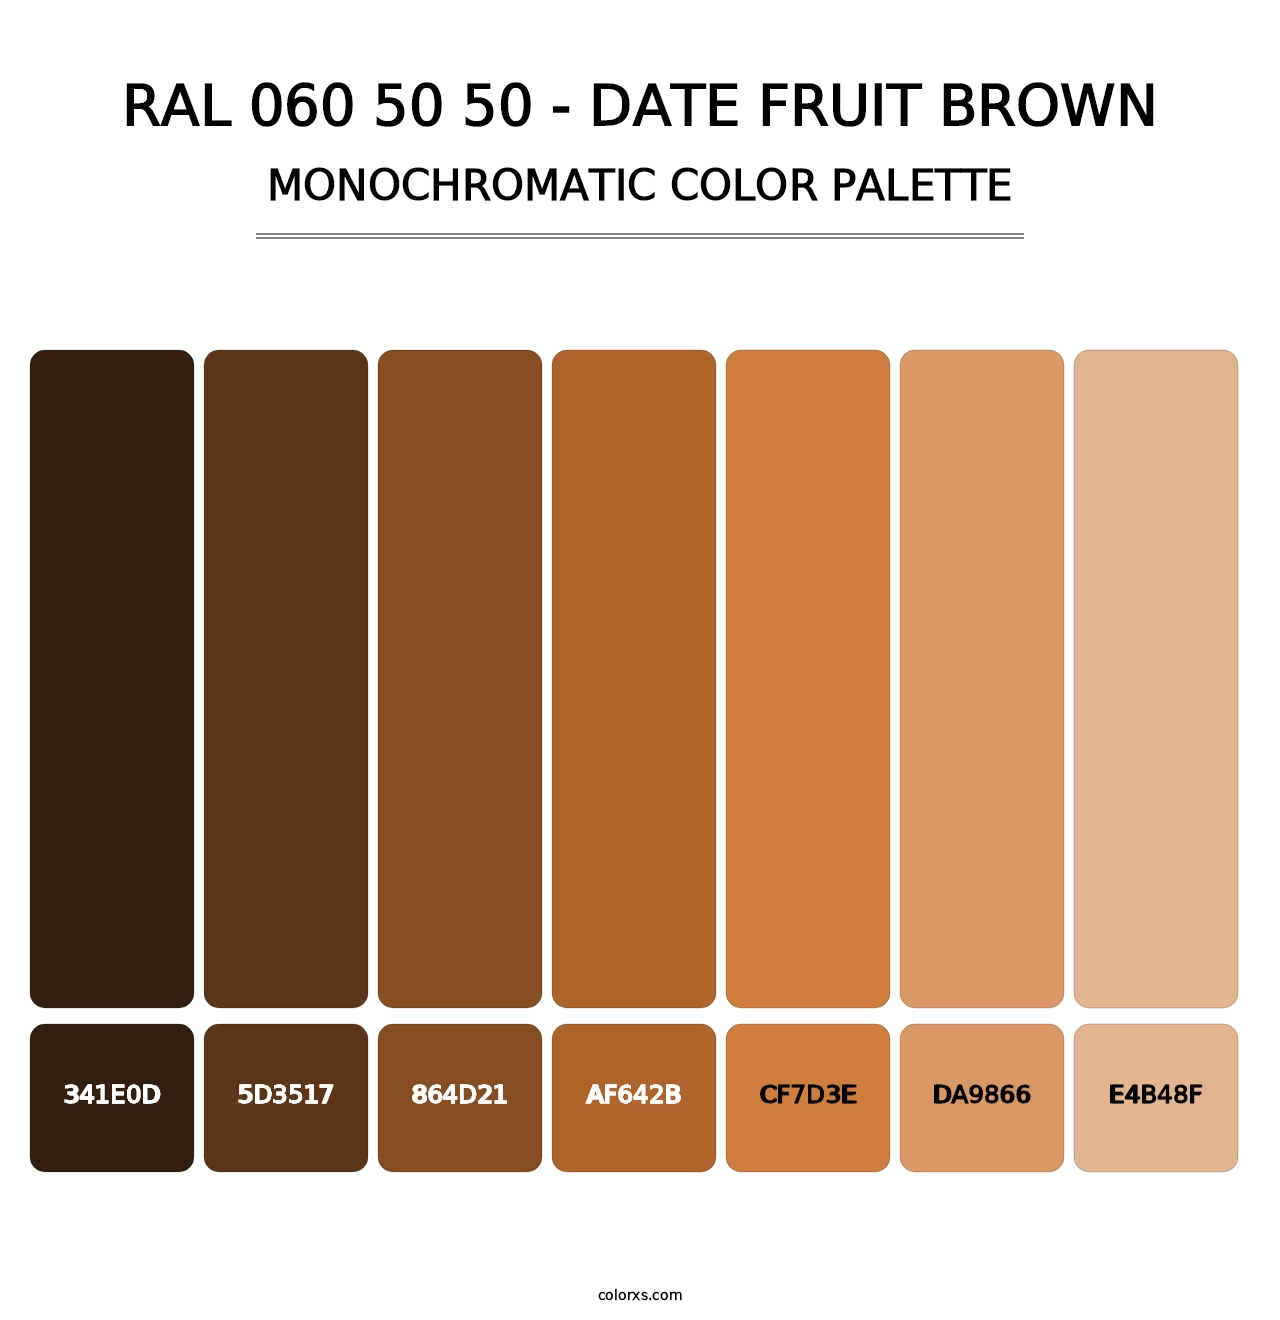 RAL 060 50 50 - Date Fruit Brown - Monochromatic Color Palette